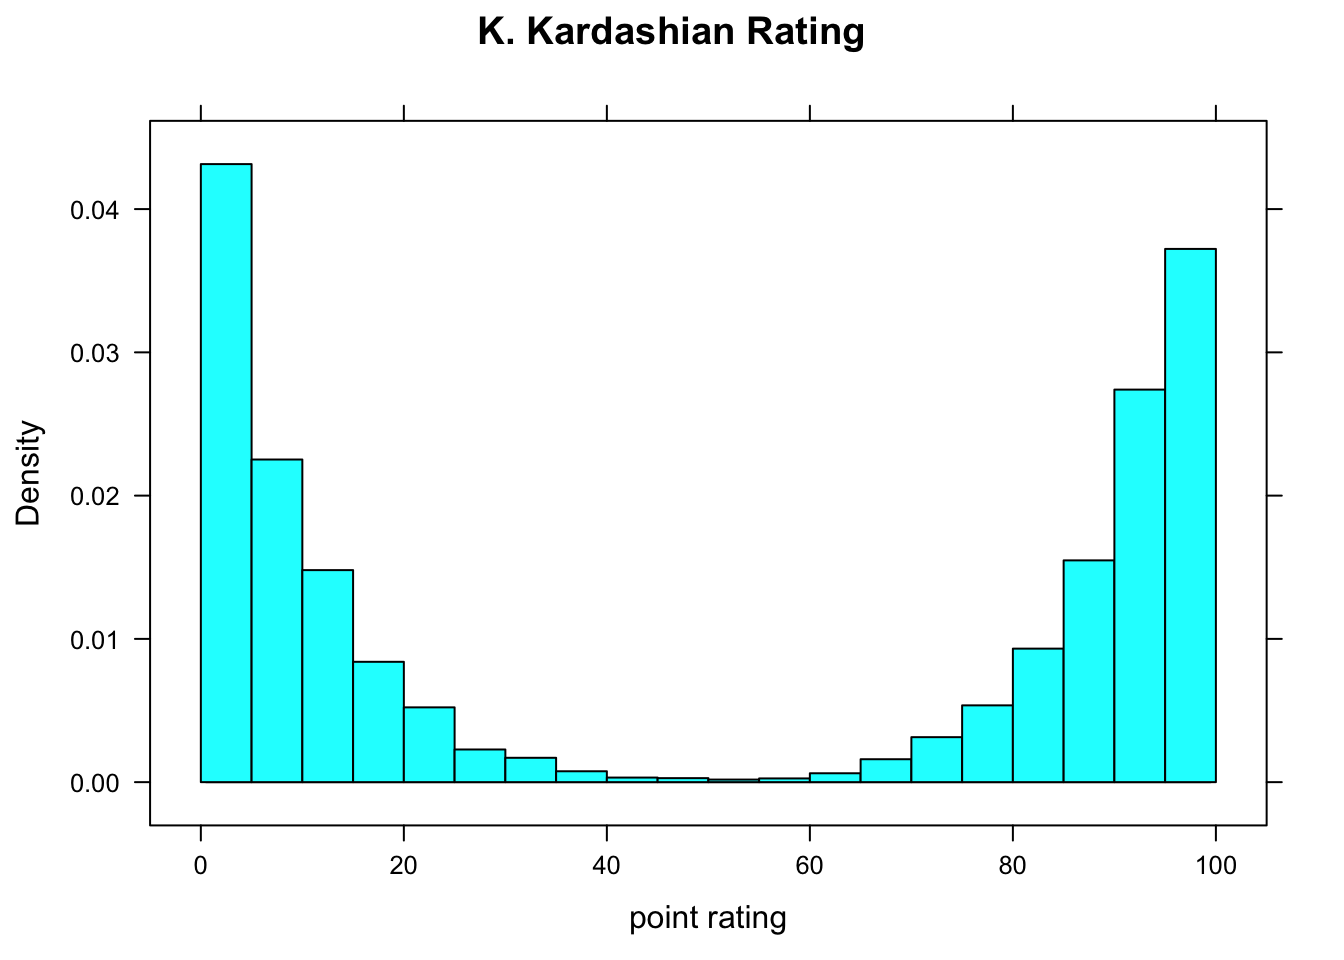 Kim Kardashian Temperature.  People either love her or hate her!